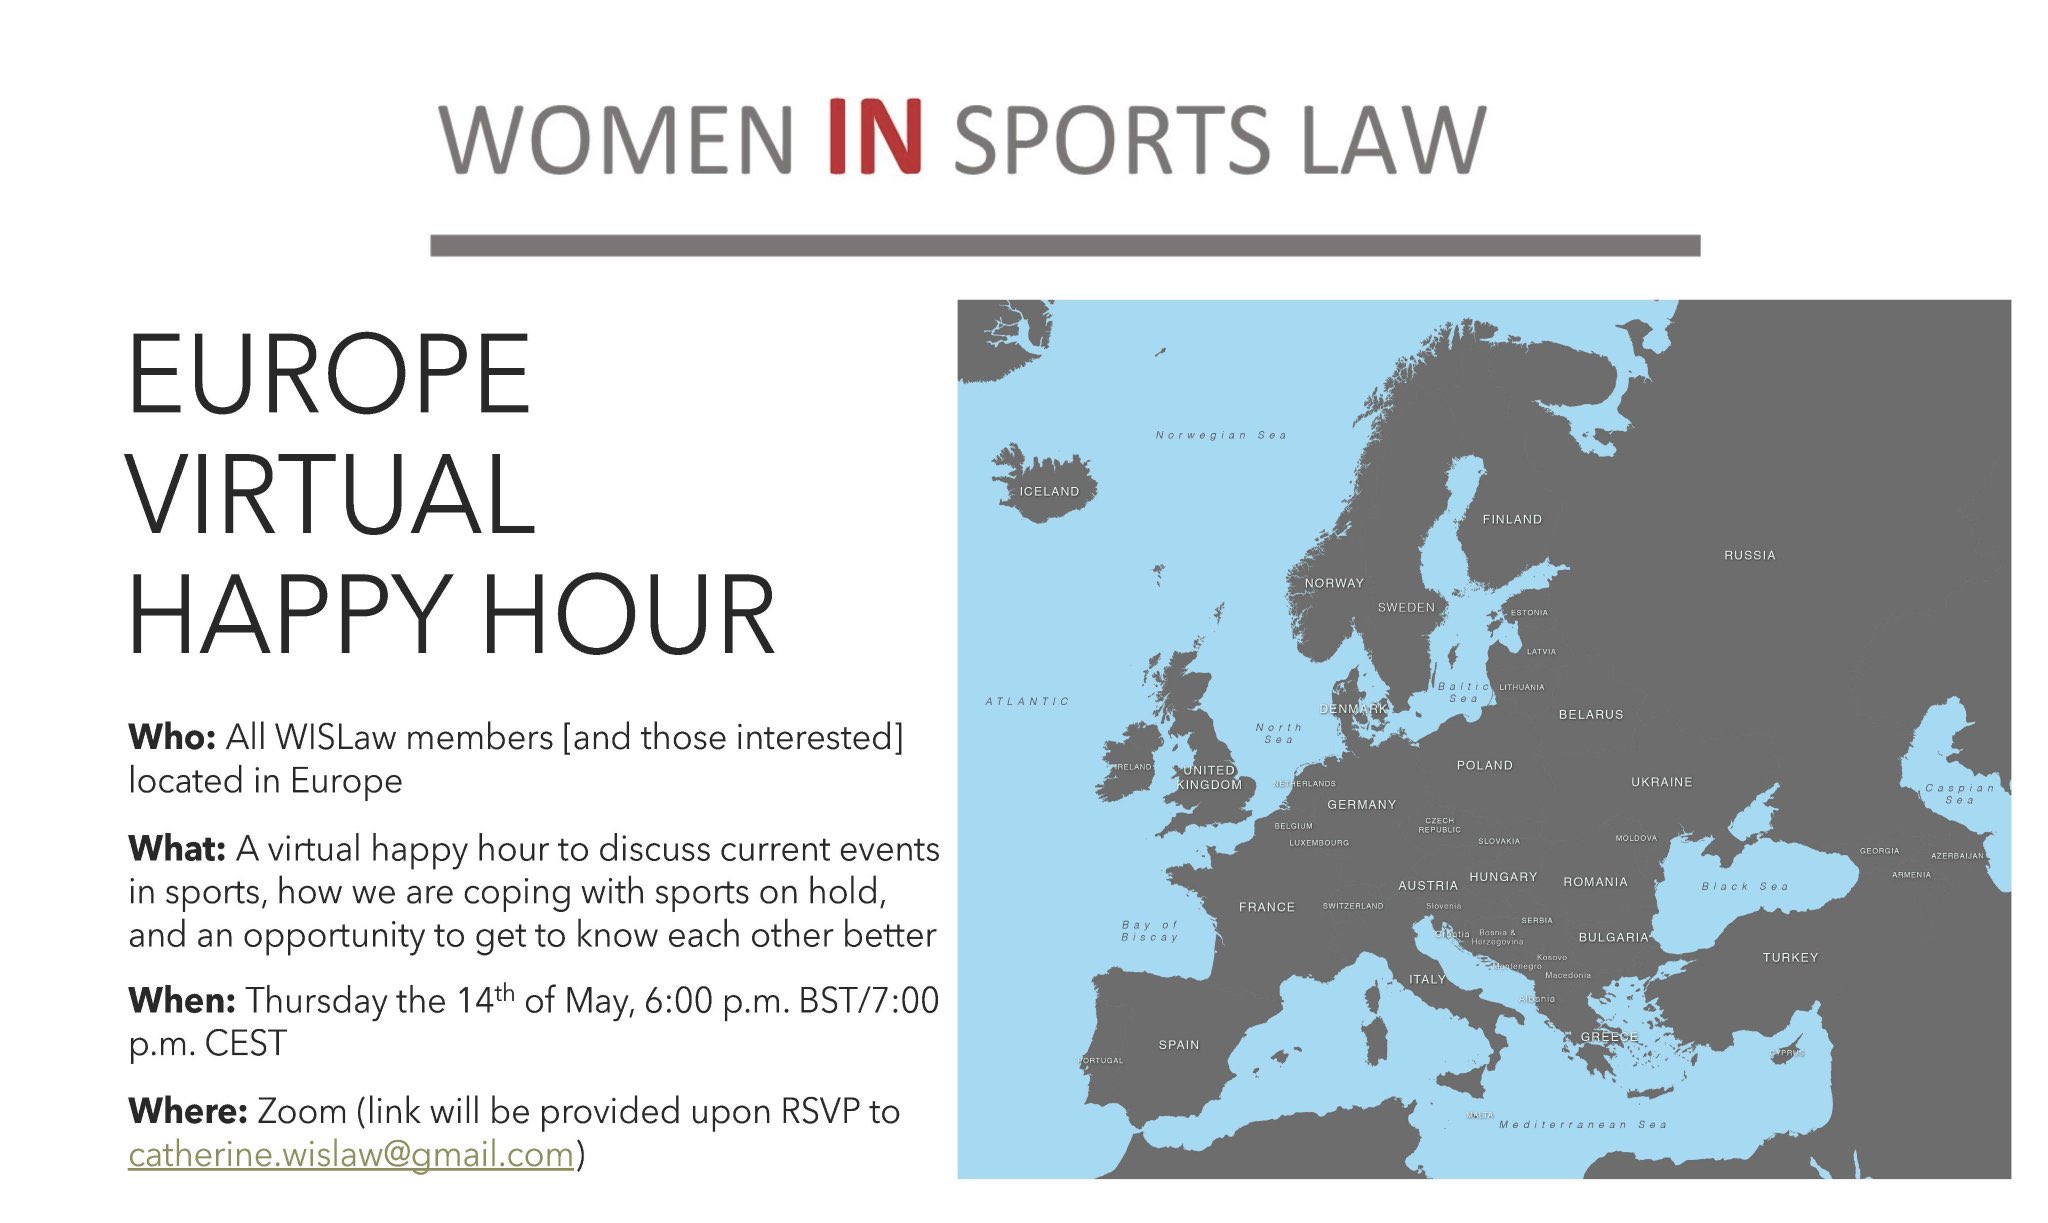 Europe Virtual Happy Hour - 14 May 2020